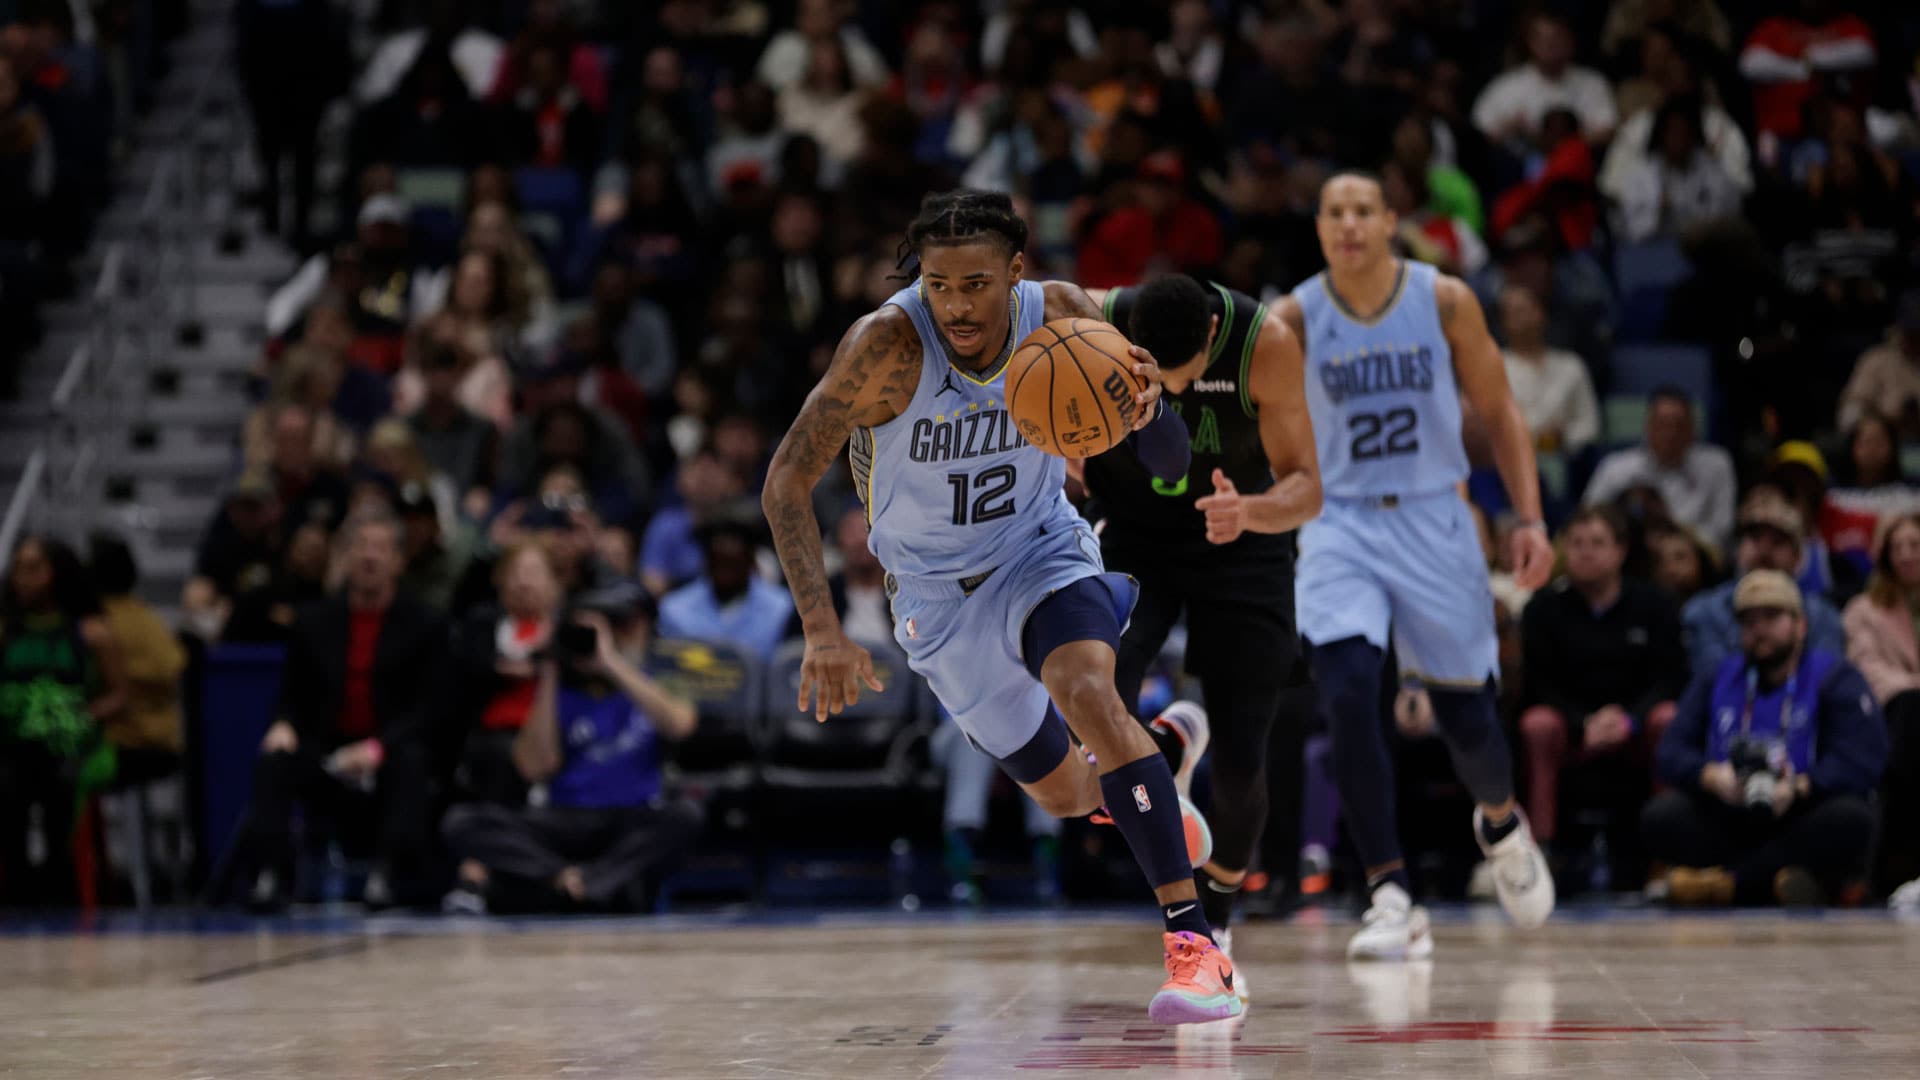 NEW ORLEANS, LA - DECEMBER 26: Ja Morant #12 of the Memphis Grizzlies dribbles the ball during the game against the New Orleans Pelicans on December 26, 2023 at the Smoothie King Center in New Orleans, Louisiana.